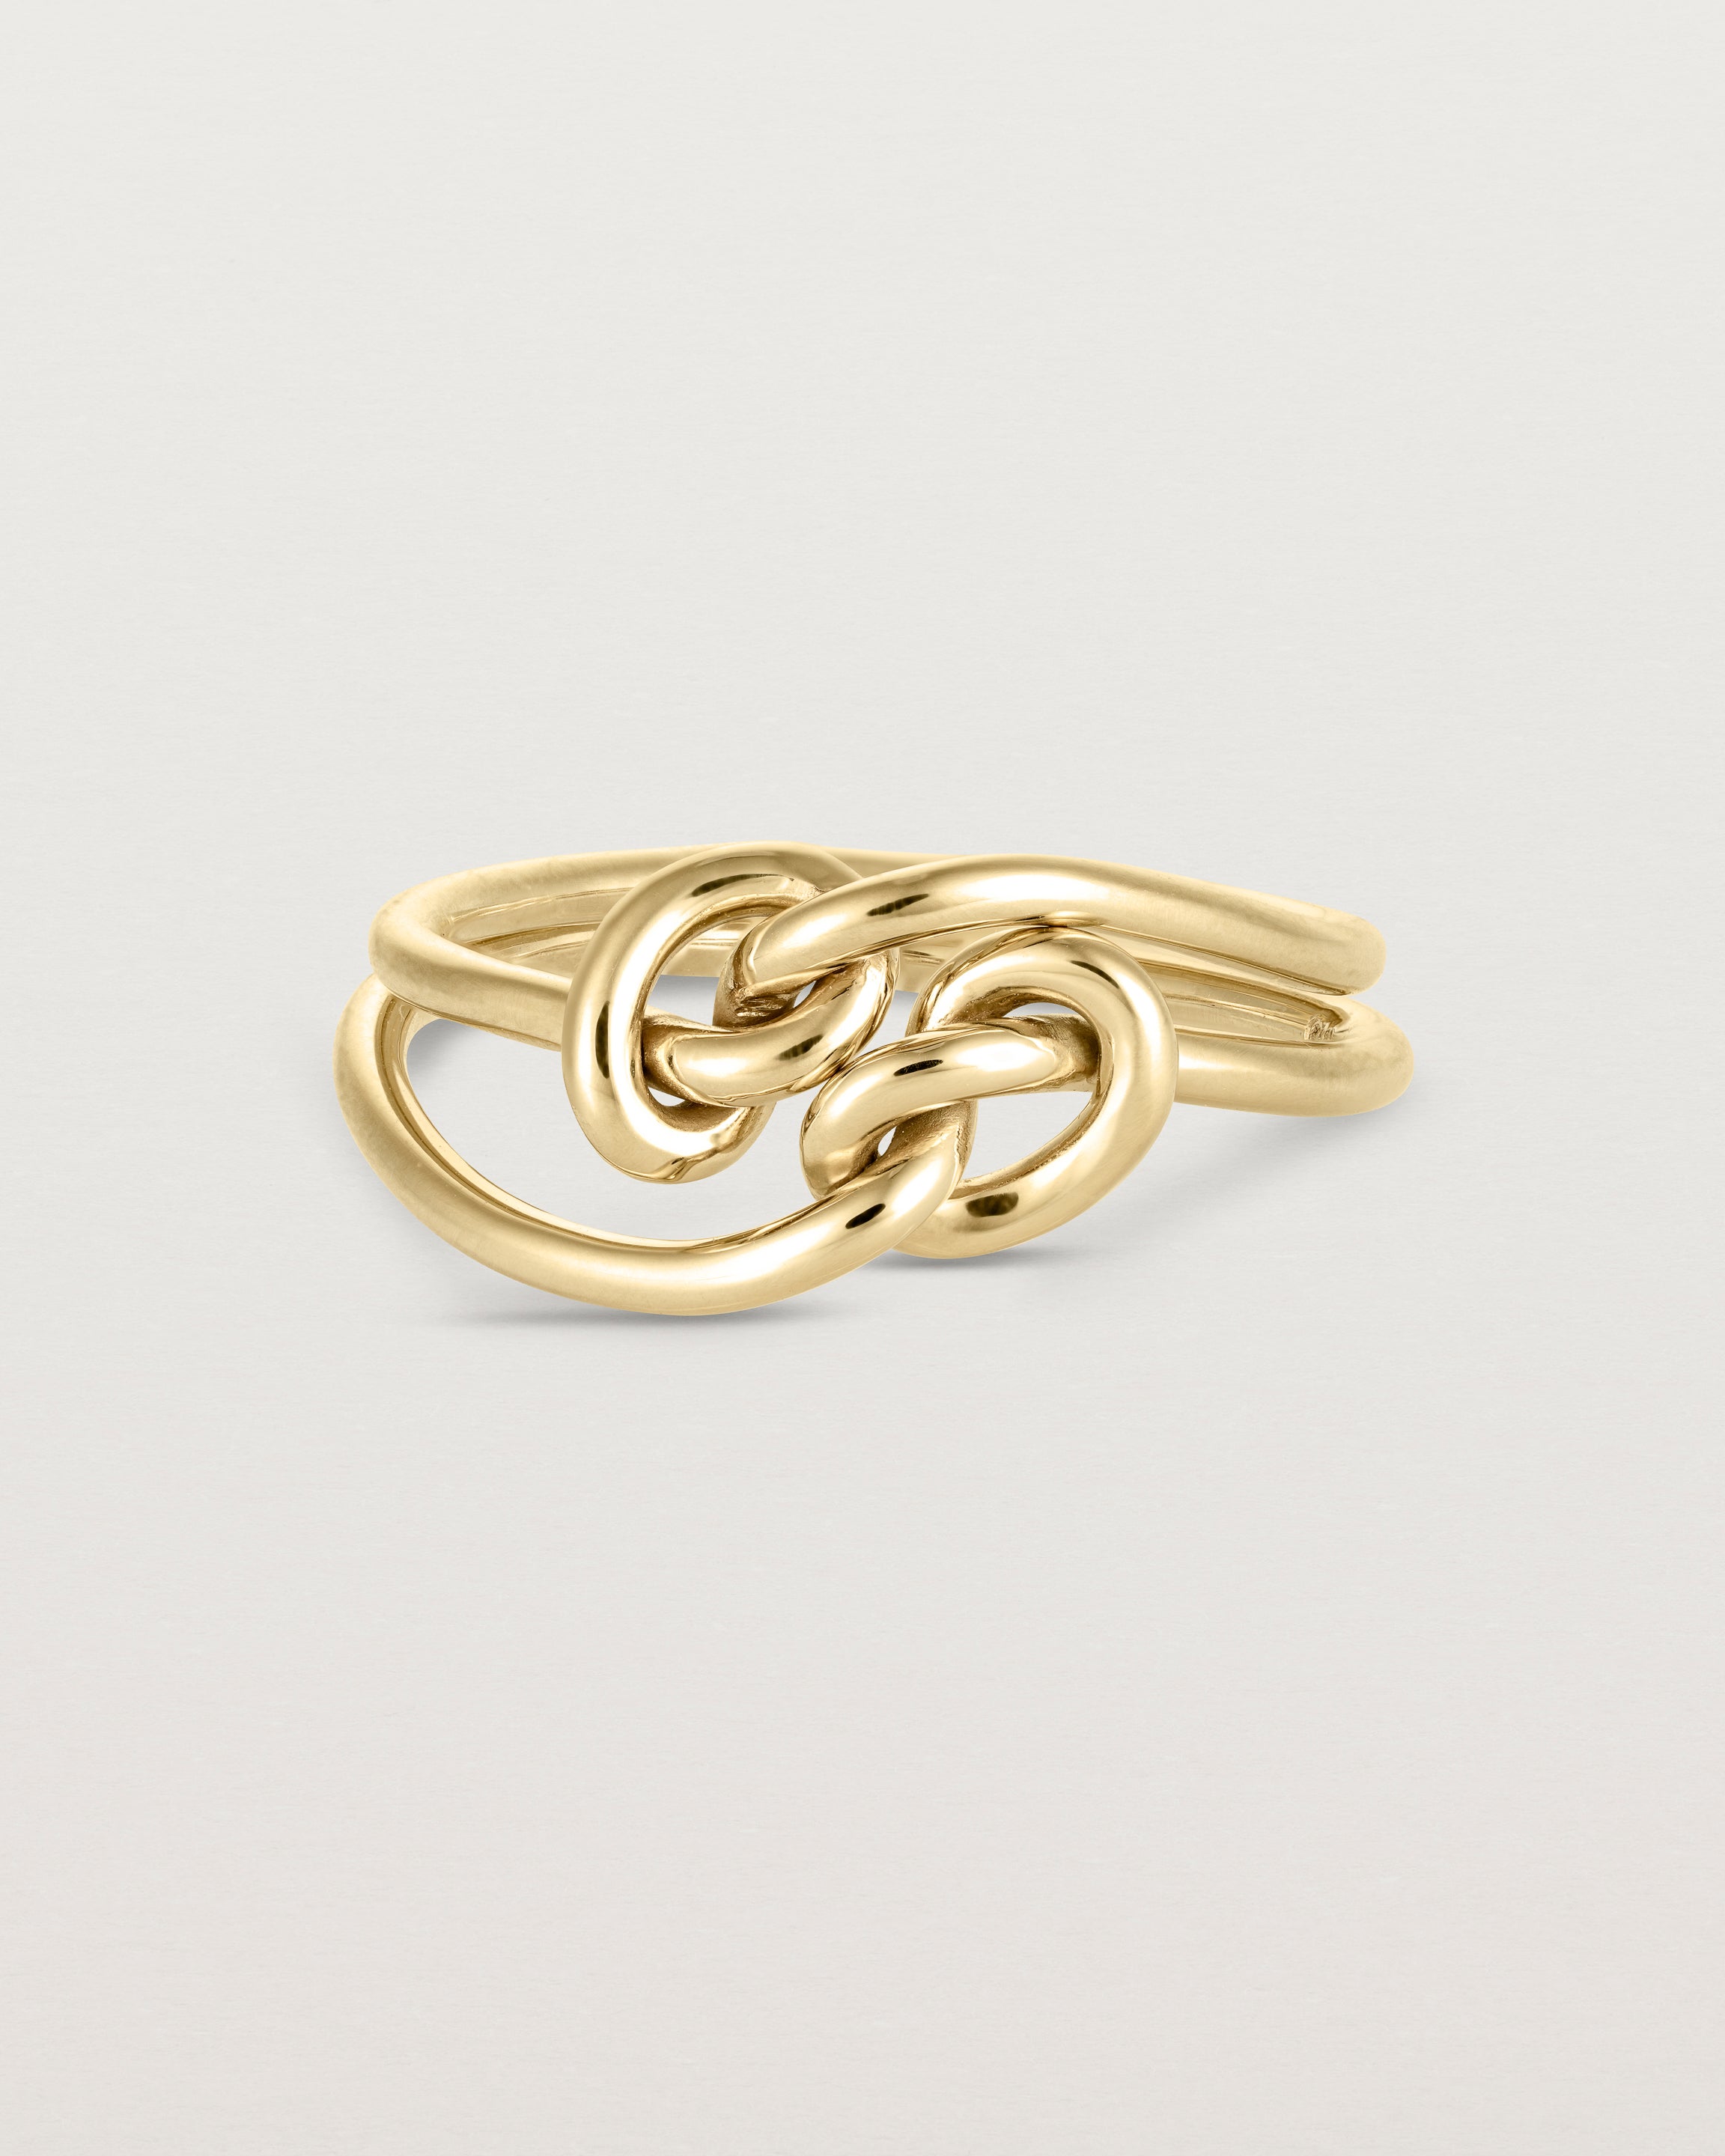 _label: Two Cara Ring's stacked together